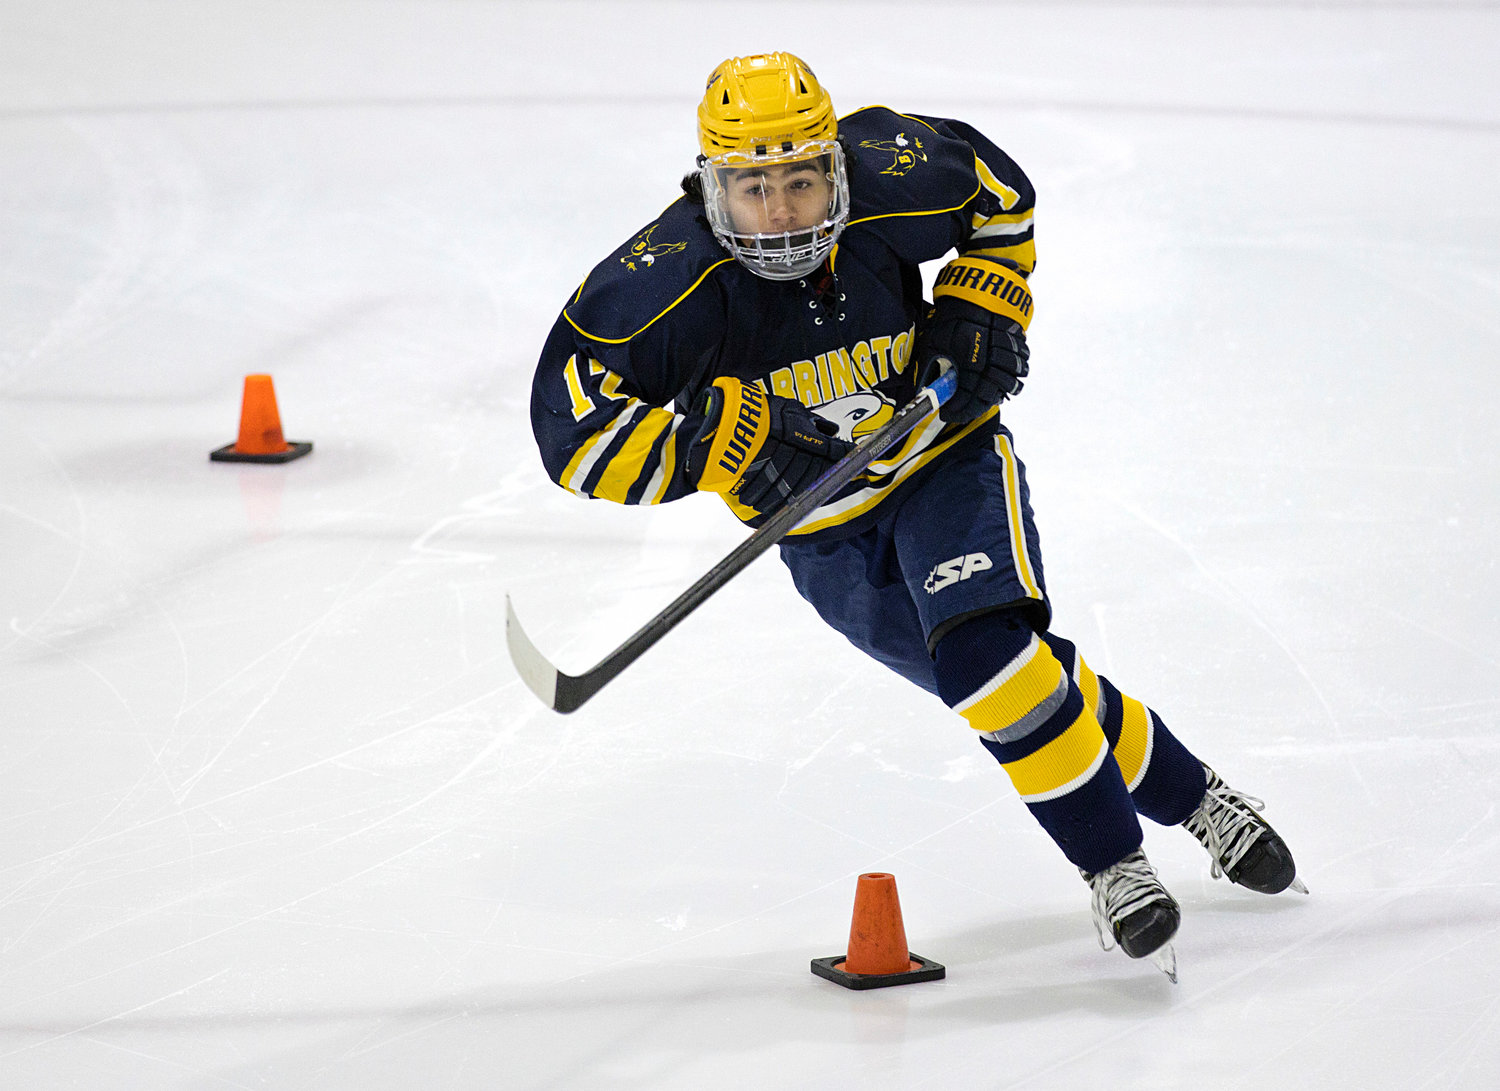 Drake Almeida speed skates around cones while competing for the fastest time during the first-ever J.P. Medeiros Jr. Hockey Competition with Mt. Hope High School, Saturday.